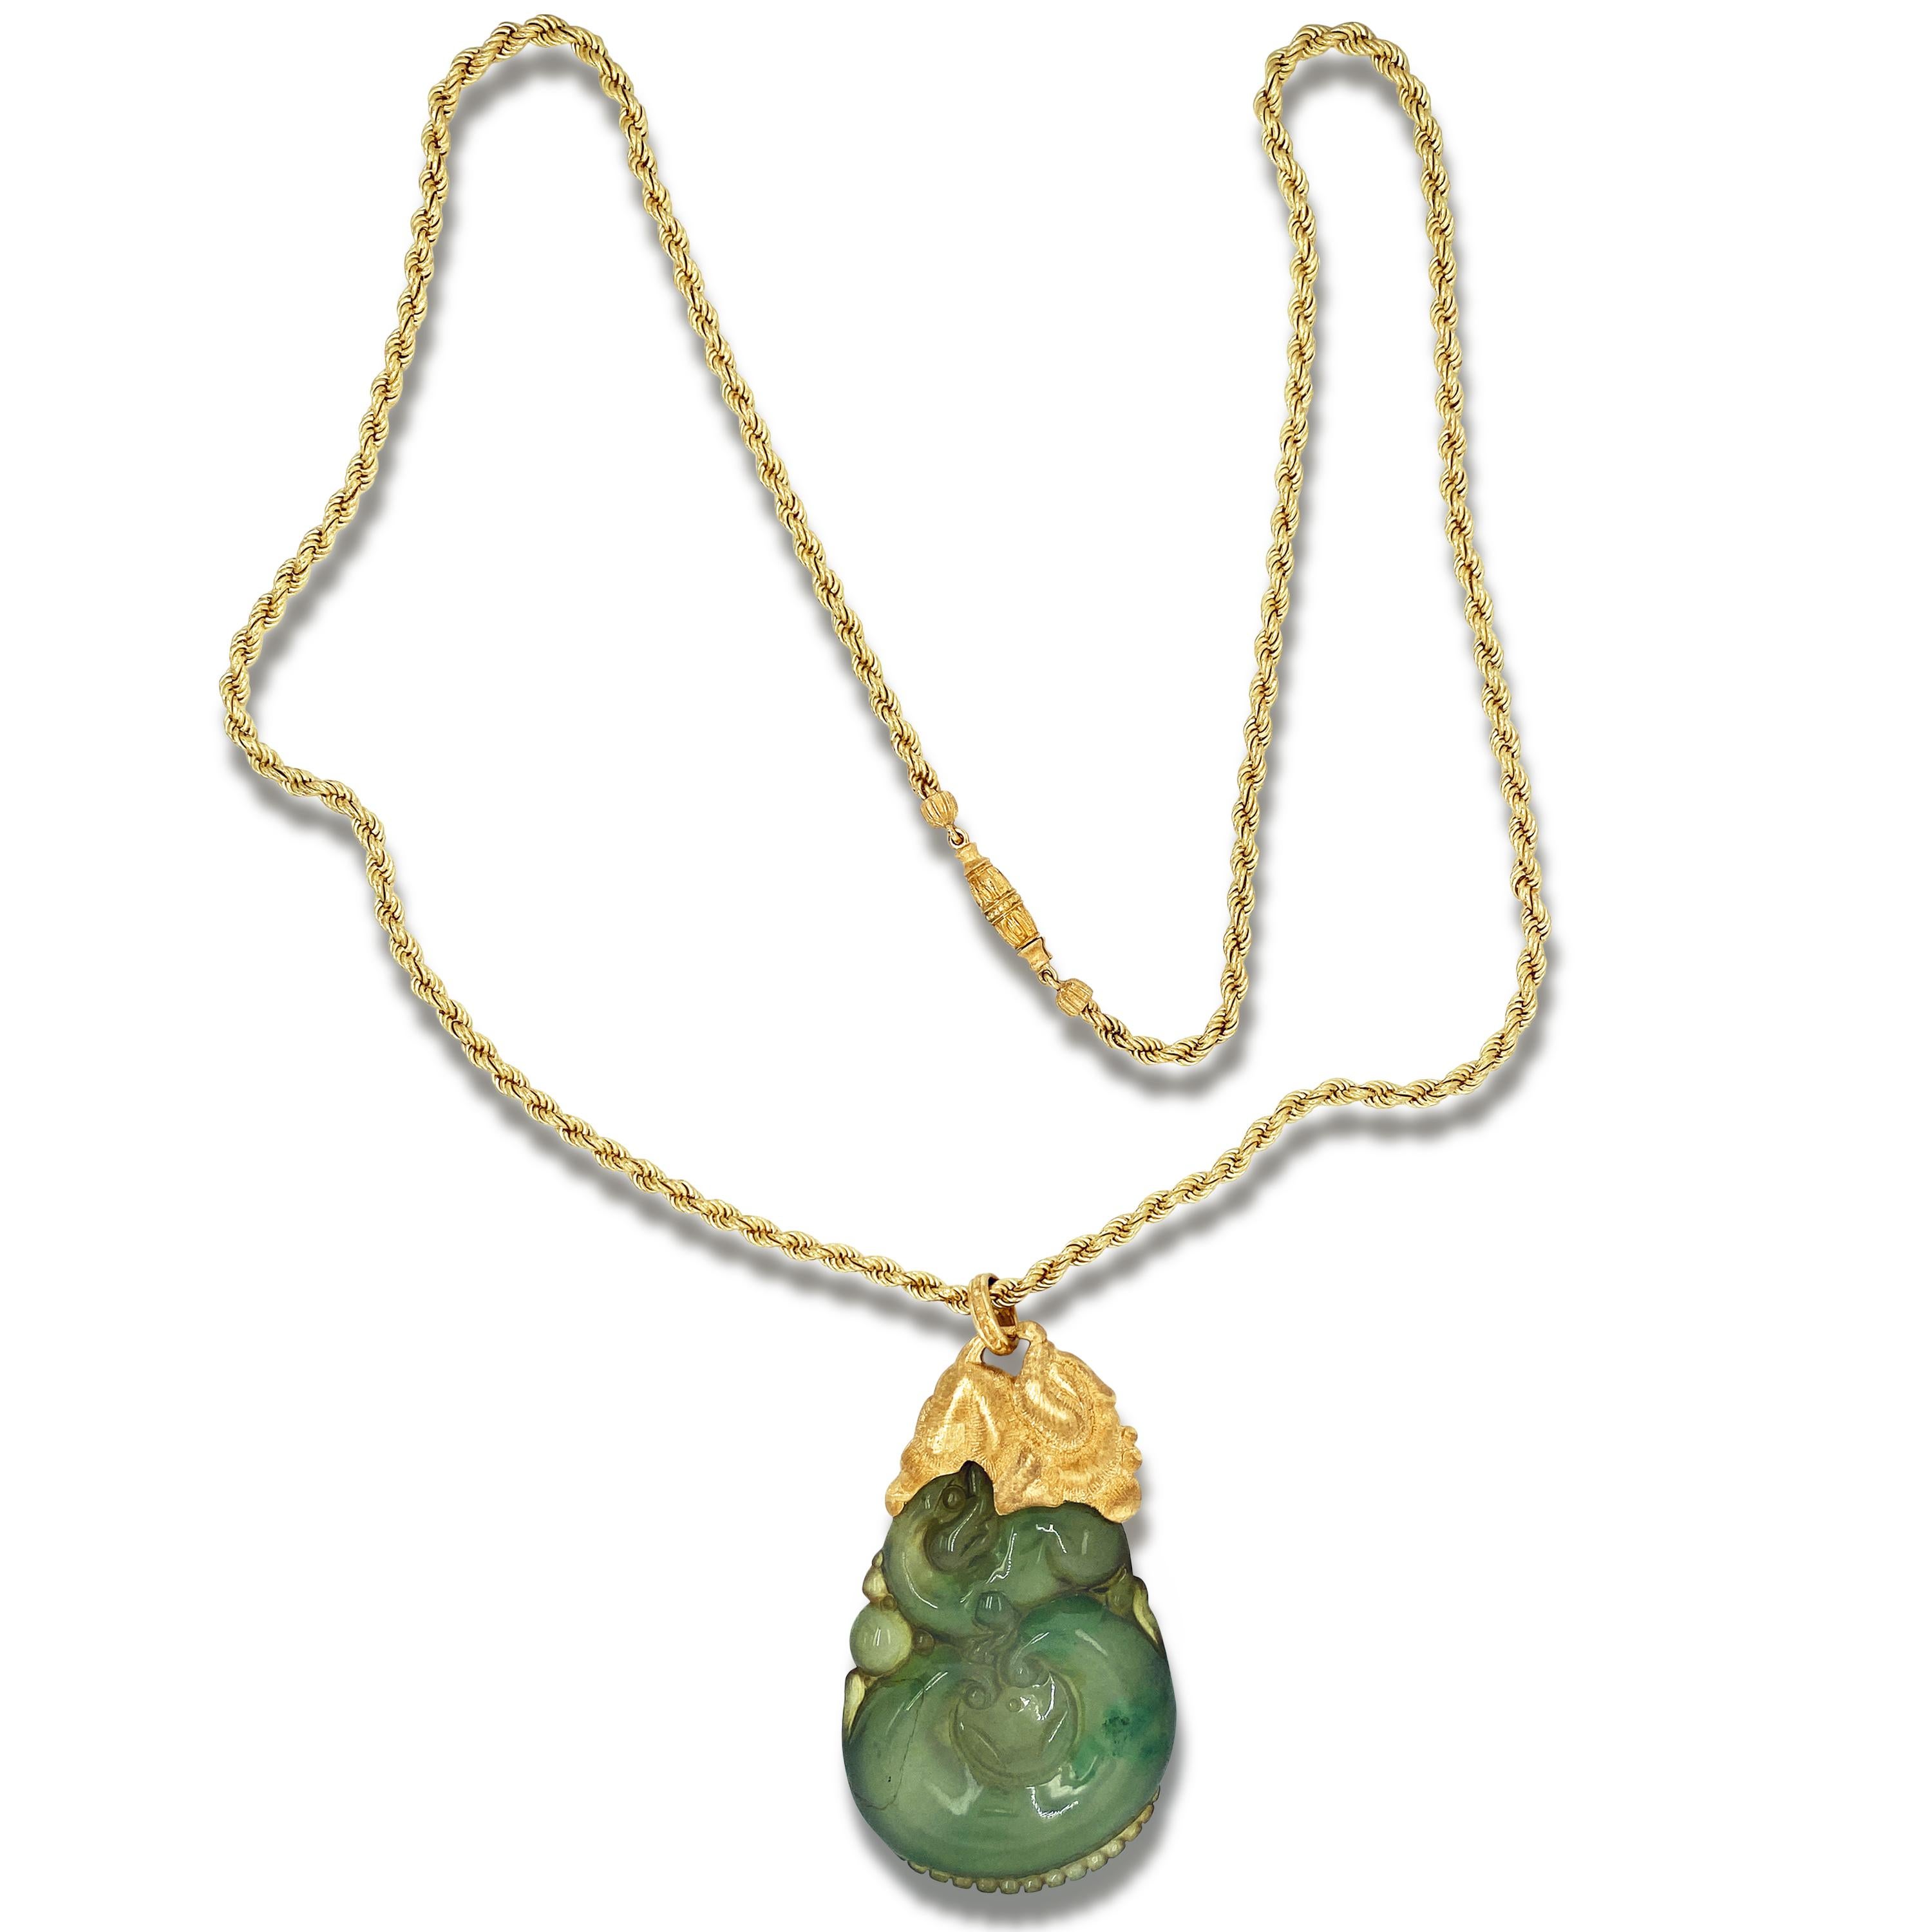 Buccellati 18K Yellow Gold Carved Jade Elephant One of a Kind Pendant Necklace

This one-of-a-kind necklace by Buccelatti showcases a special-carved Jade as an elephant. 

Special rope style chain used by Buccellati on this piece. Chain is 24 inches